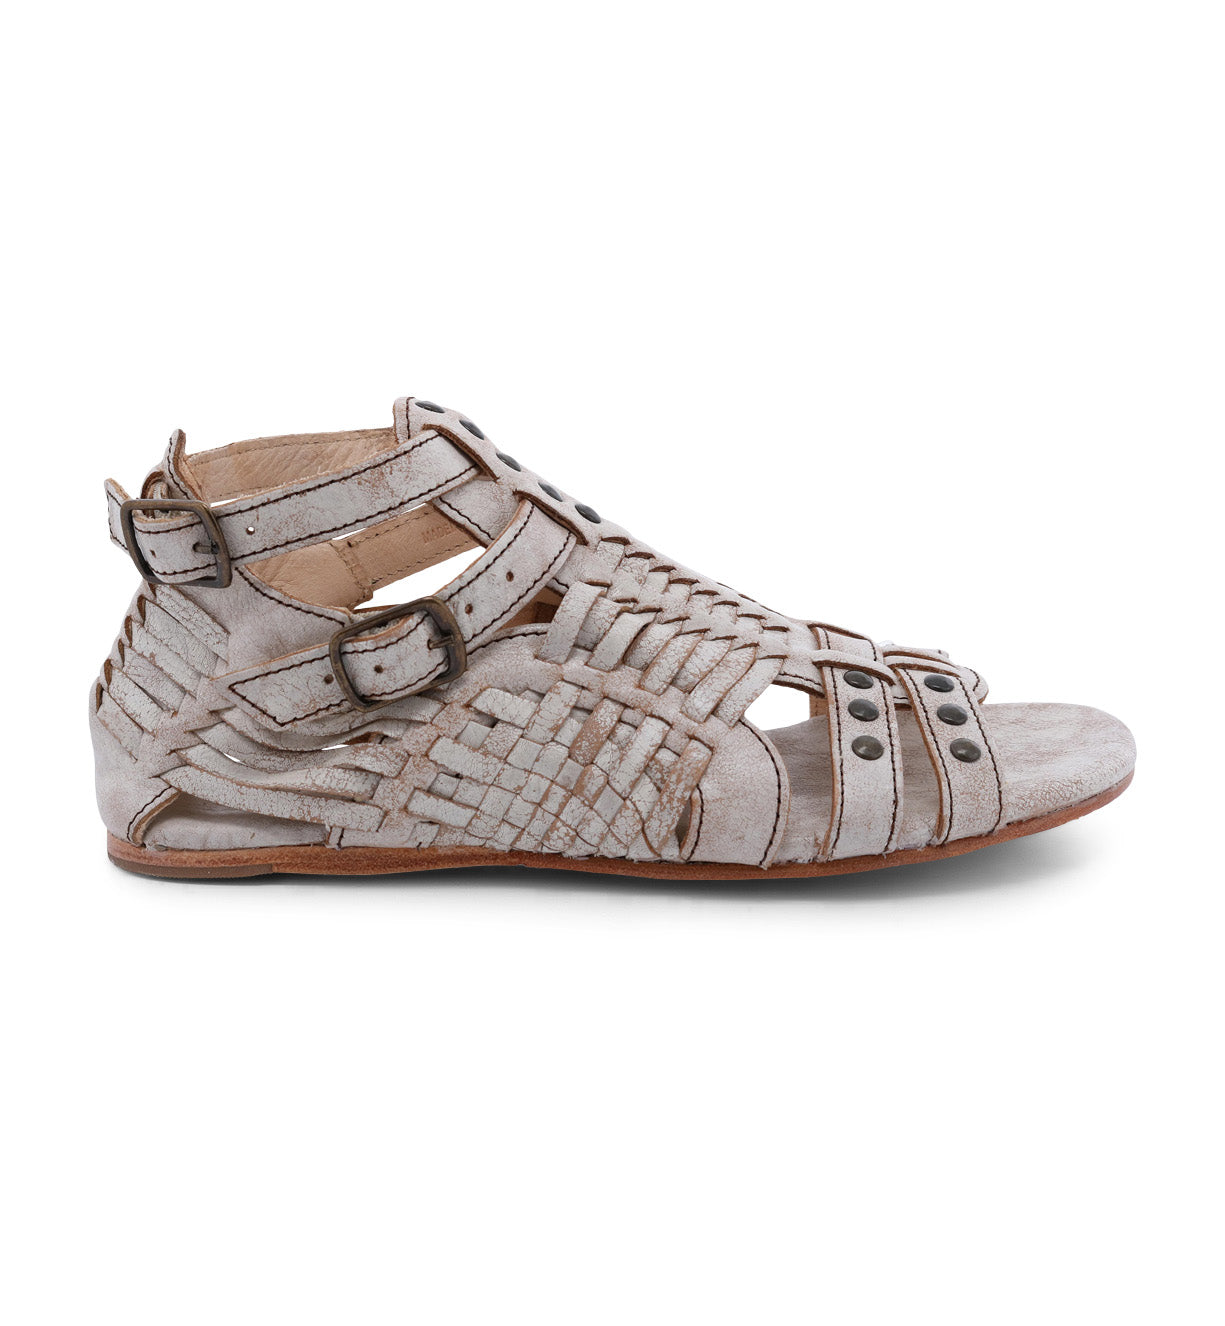 A pair of Claire sandals with straps and buckles from Bed Stu.